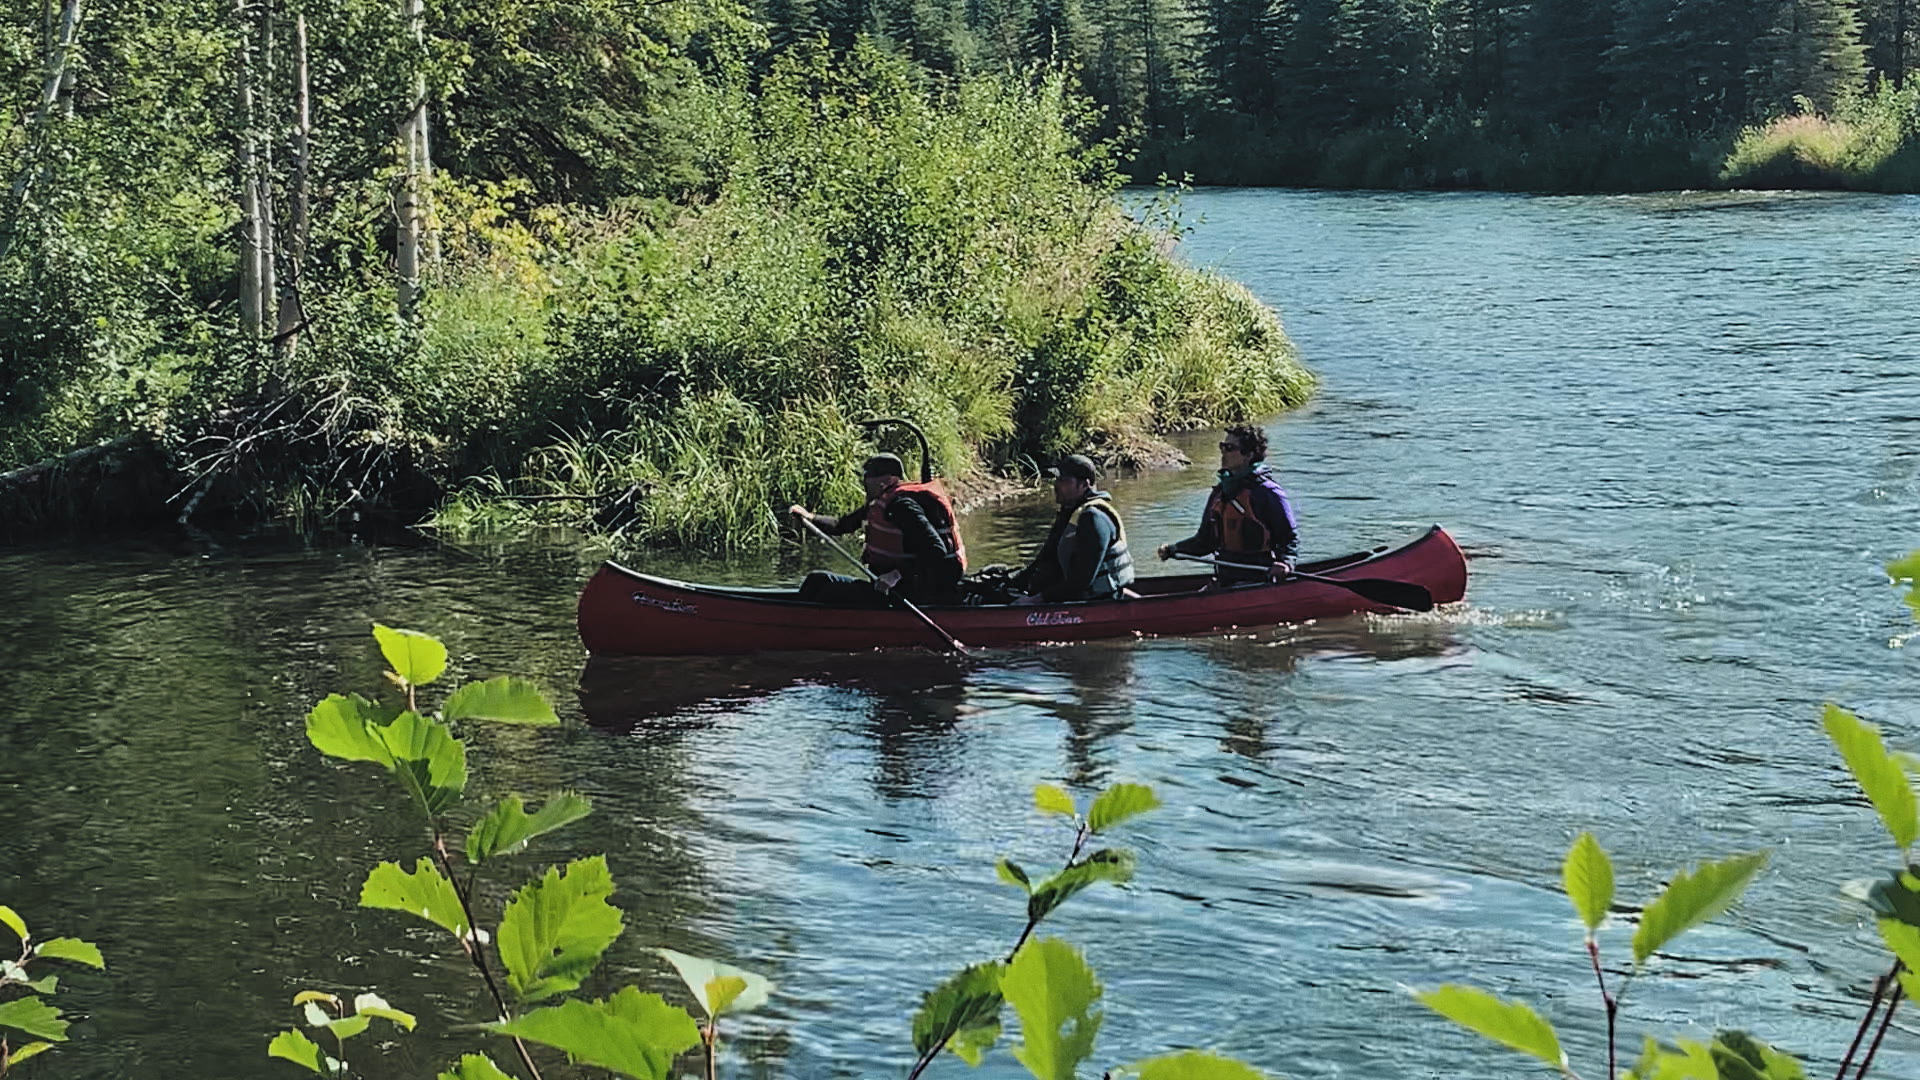 Three people on a canoe boat on a river